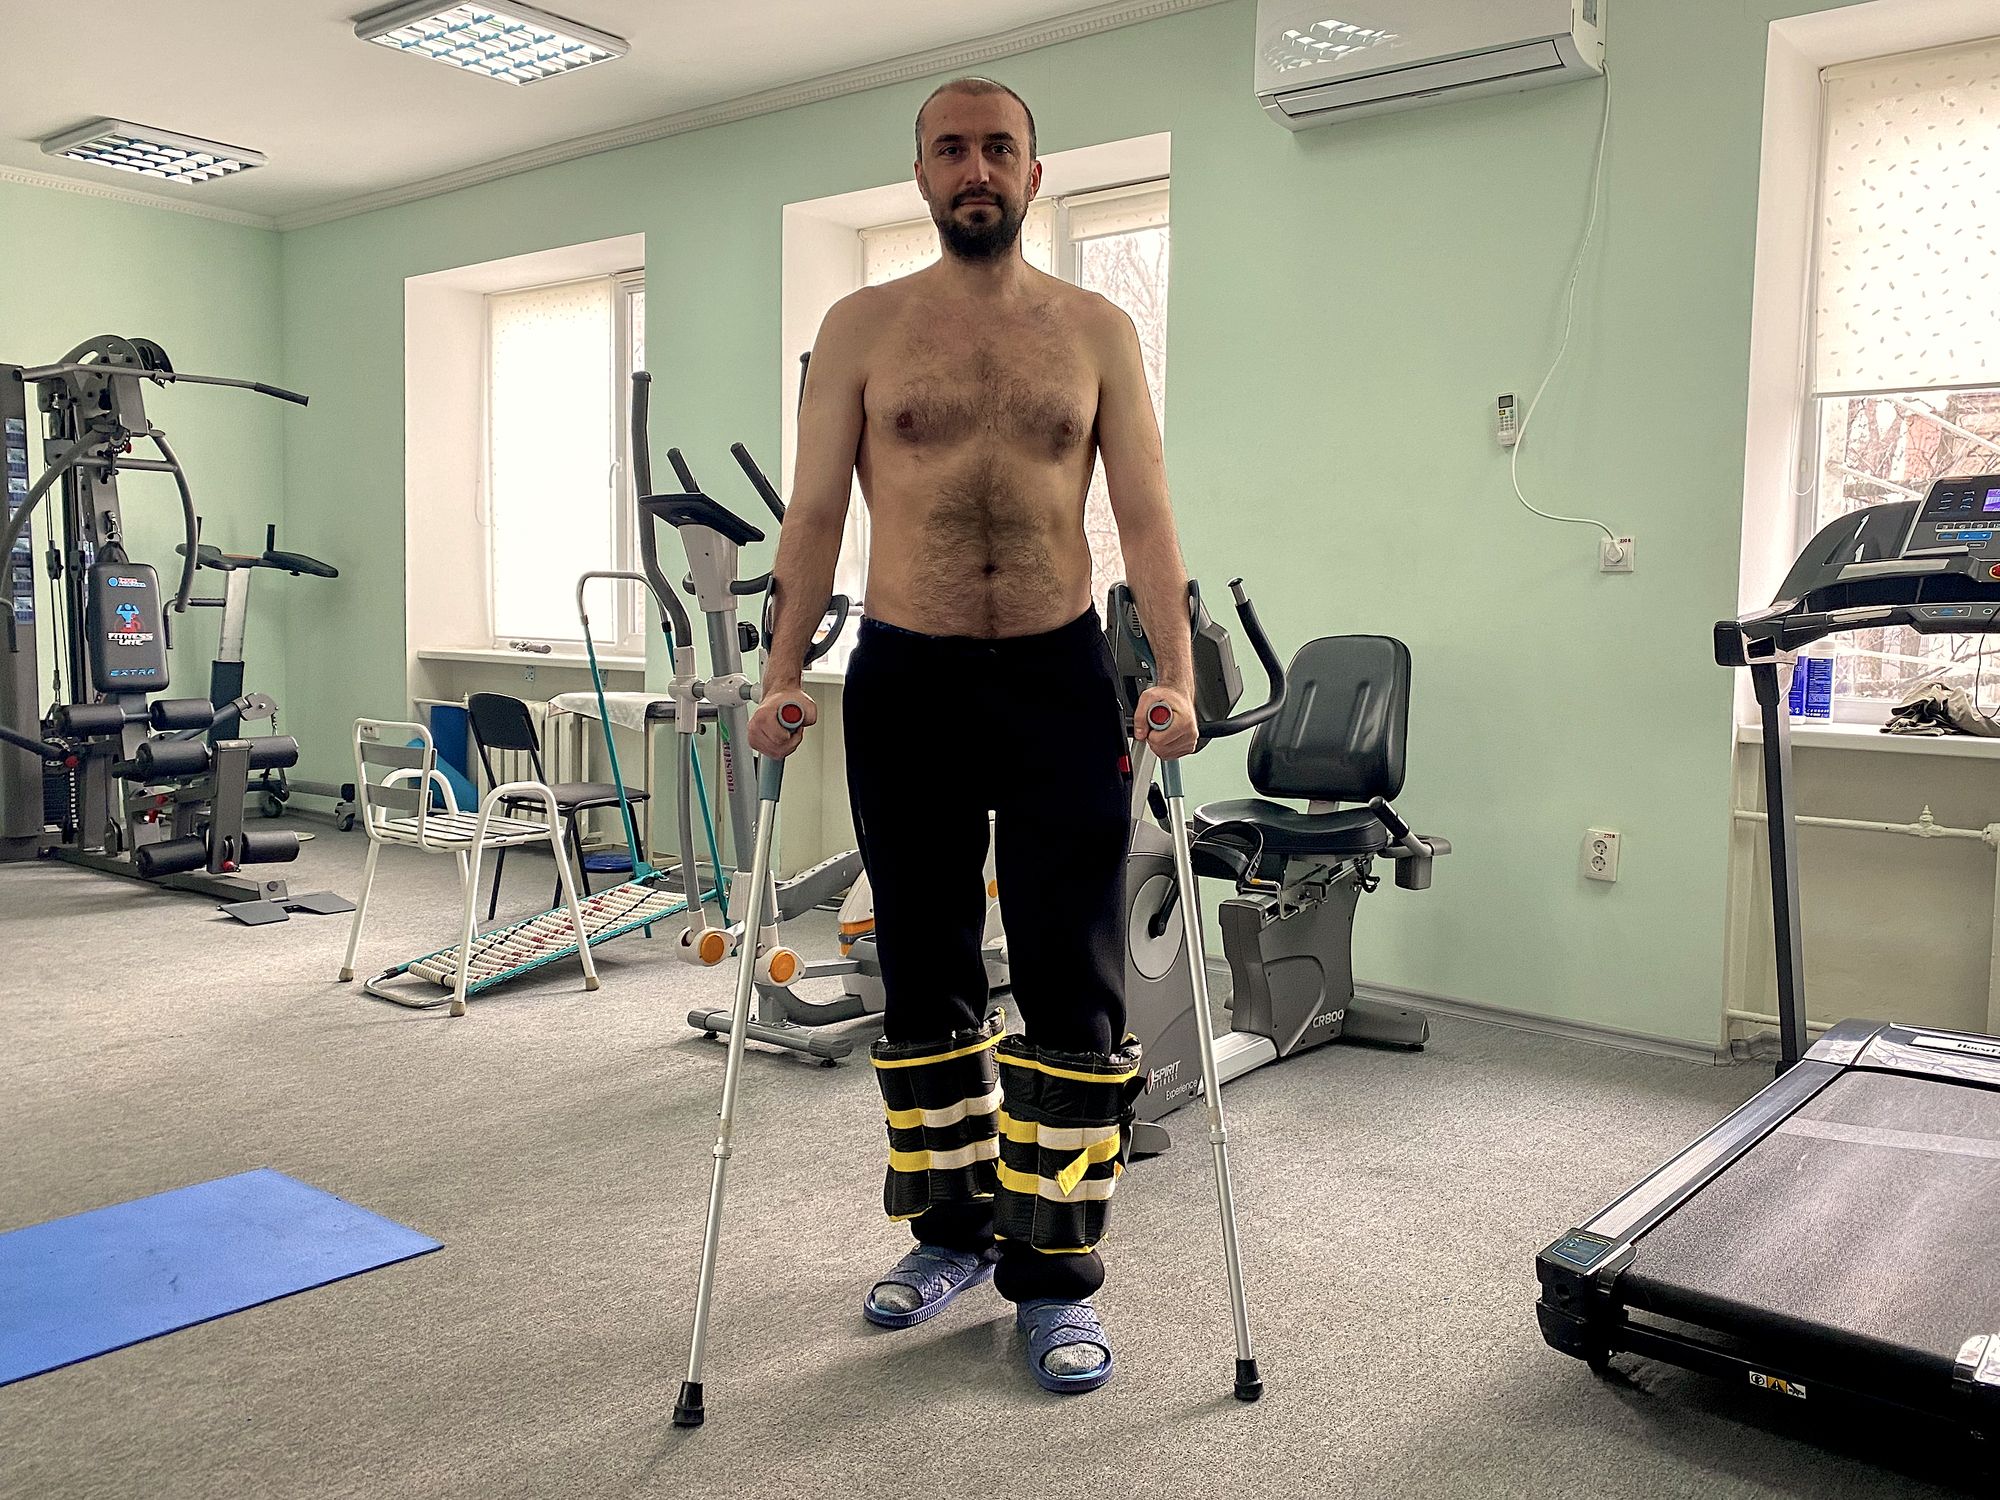 Wounded soldiers fight for recovery in Zaporizhzhia rehabilitation center